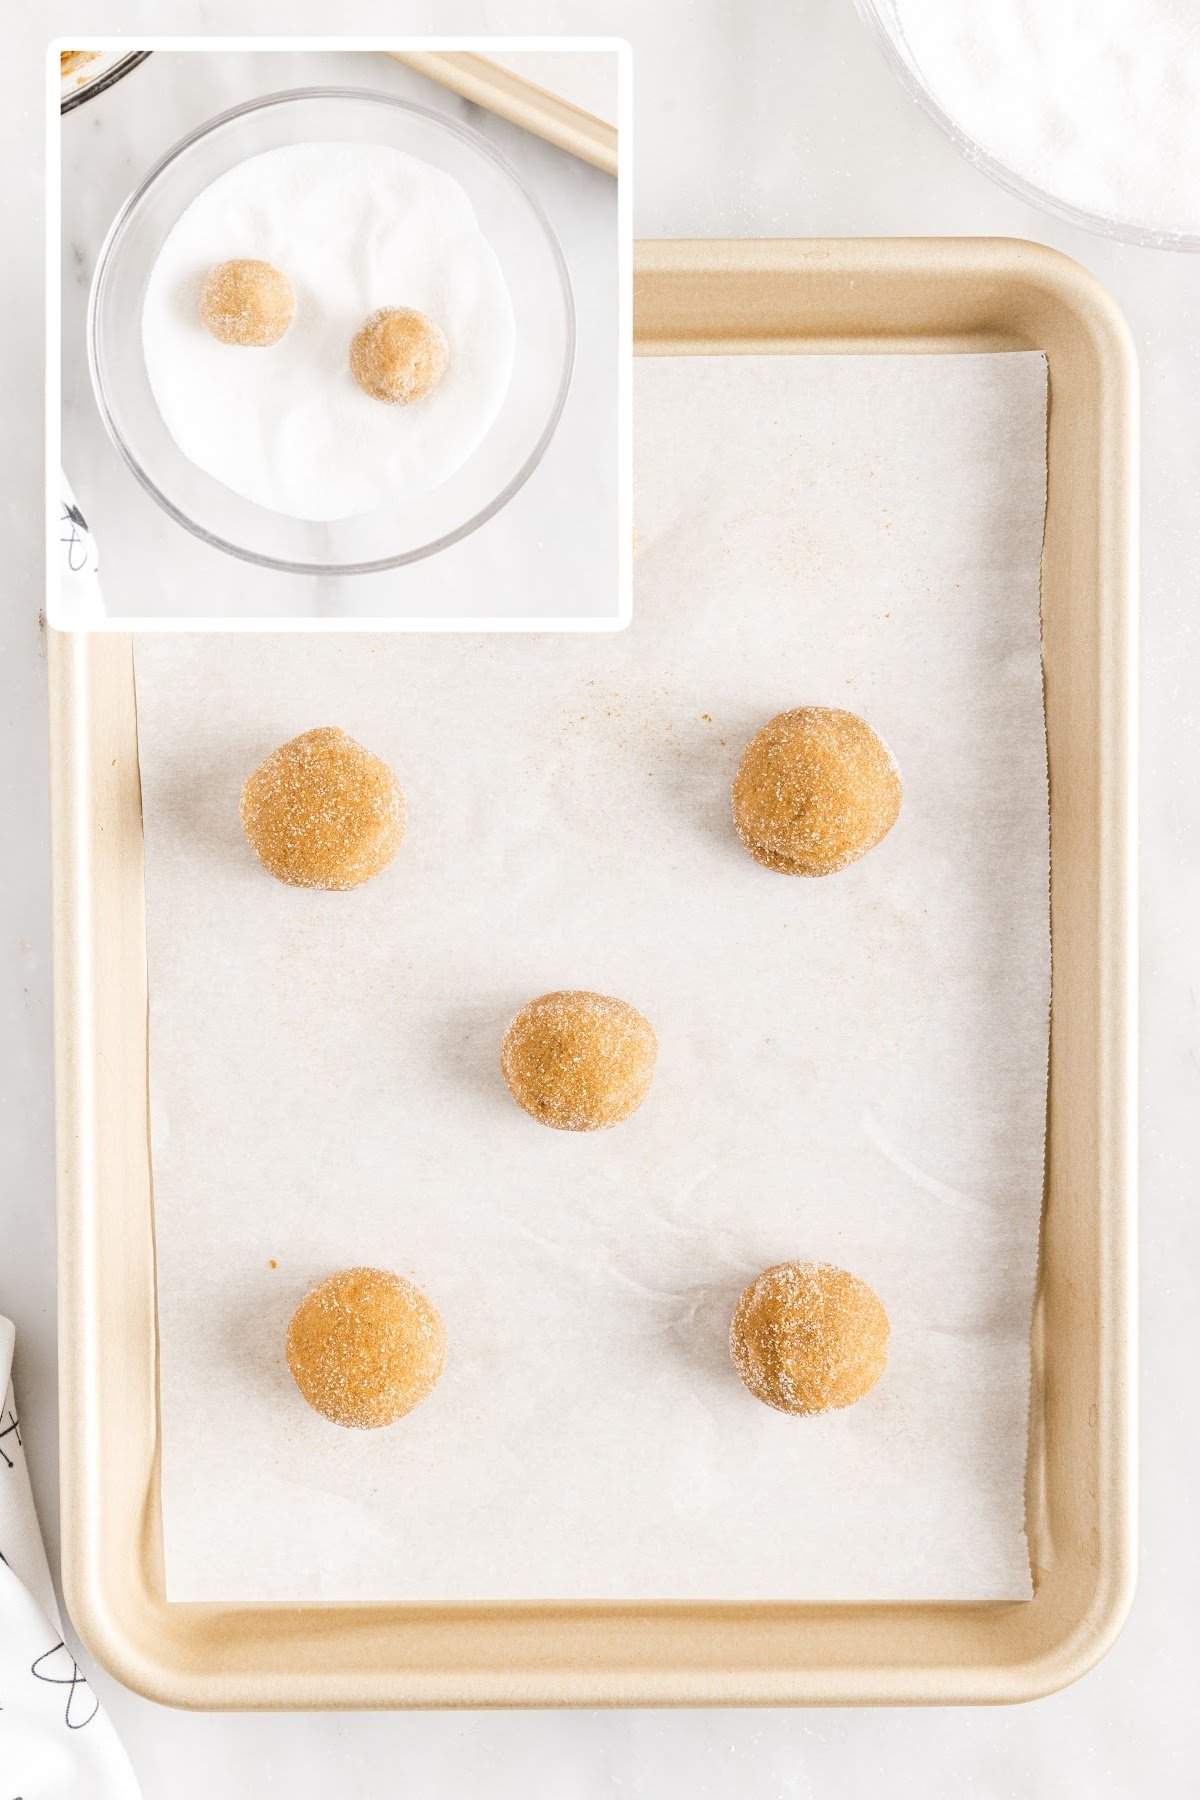 Molasses crinkle cookie dough balls rolled in sugar and placed on baking sheet lined with parchment paper.